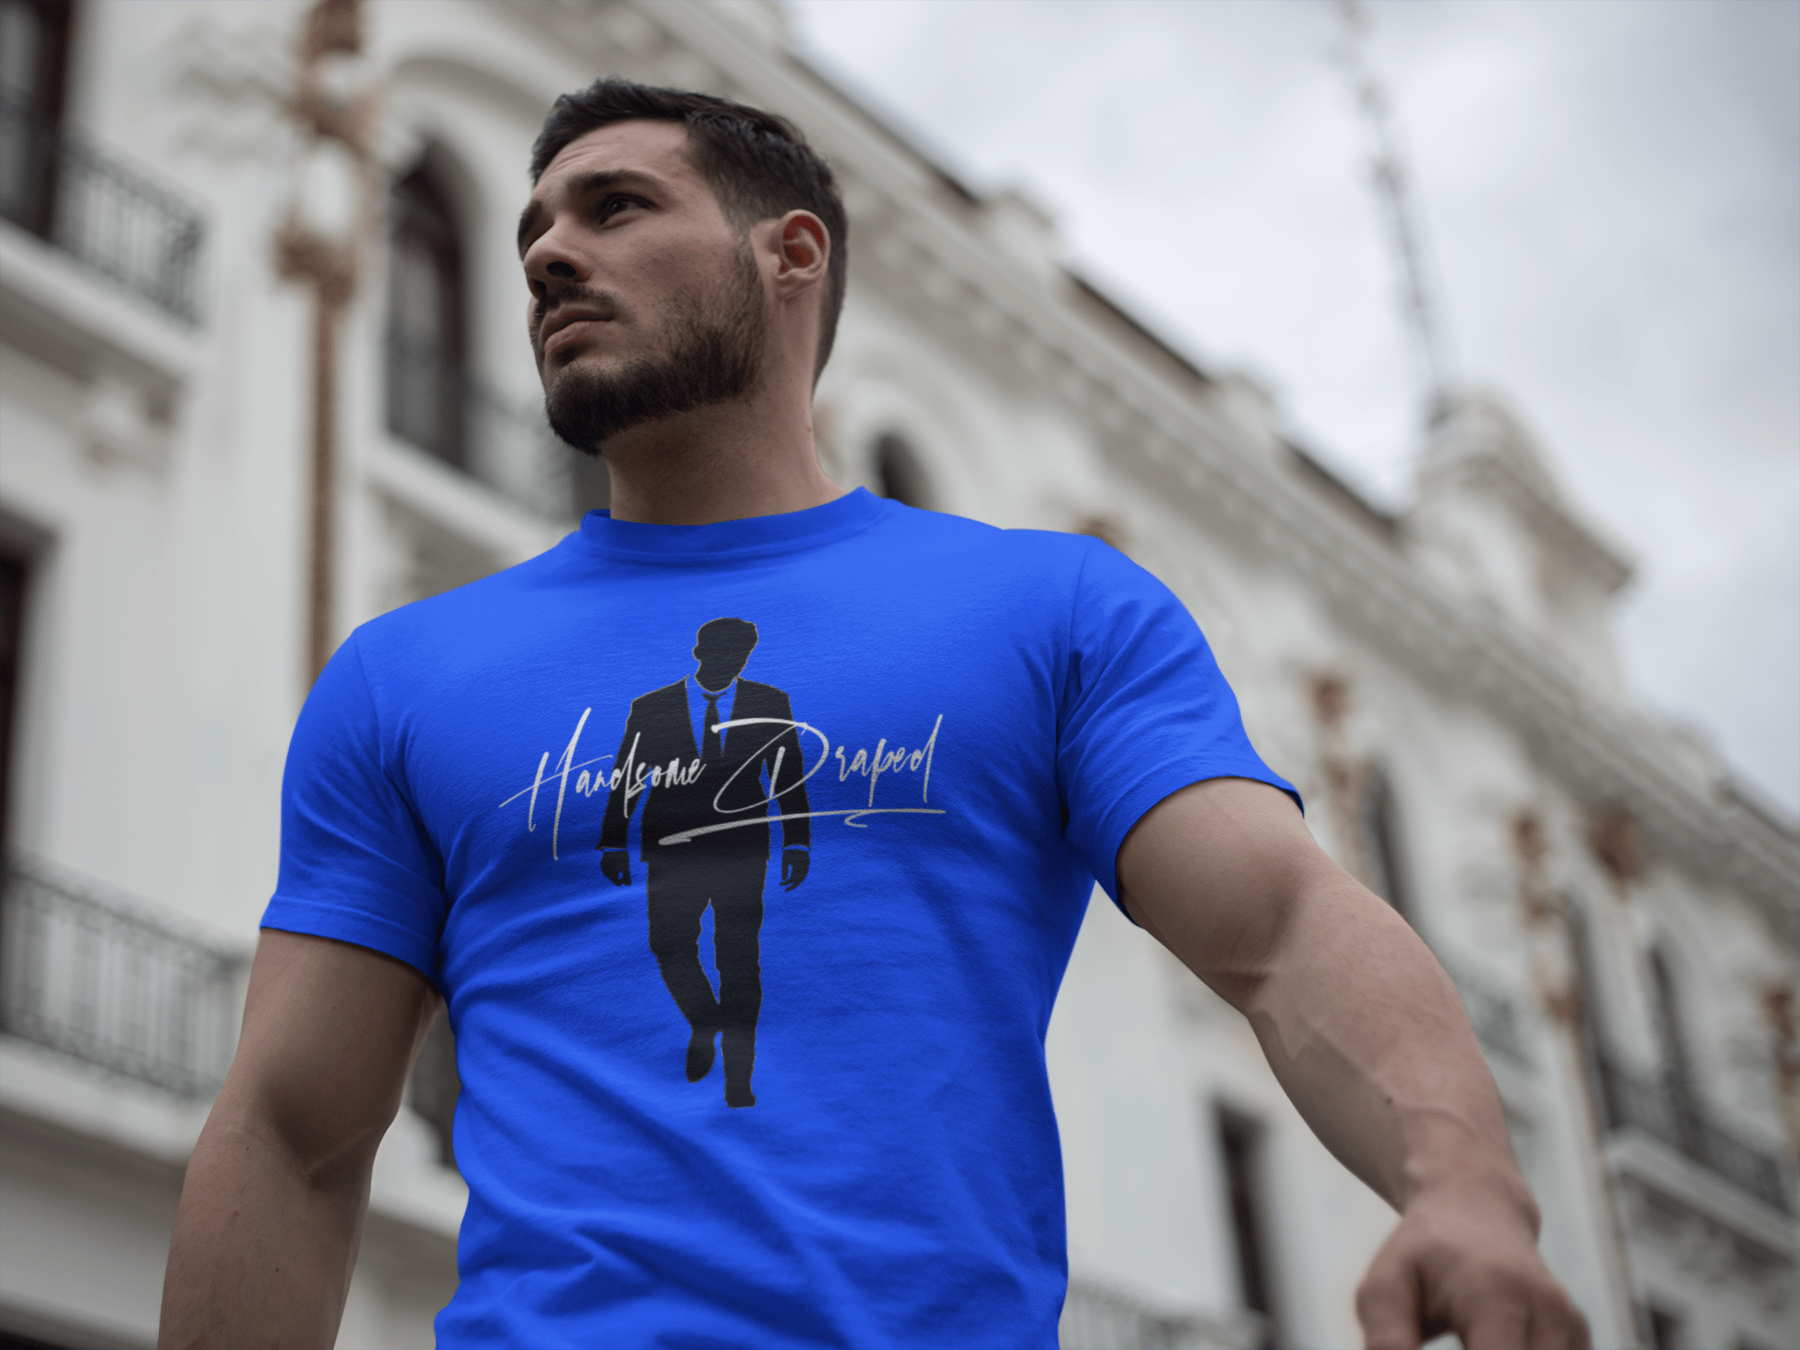 Handsome Silhouette T-shirt Clothing Wear